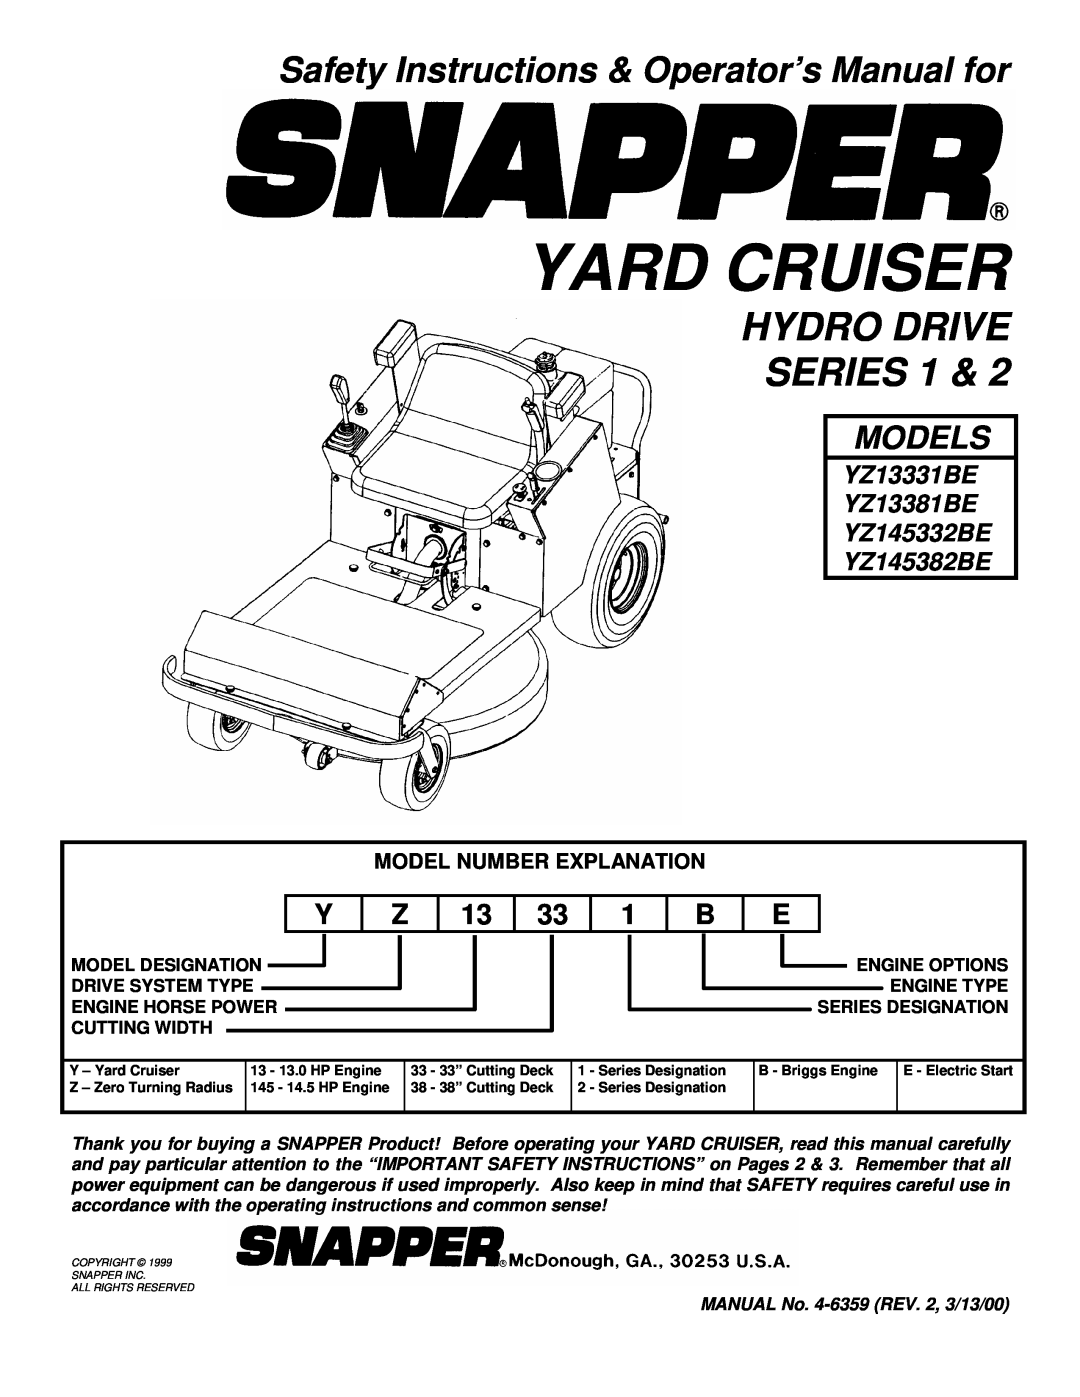 Snapper YZ13331be, YZ13381BE, YZ145332BE, YZ145382BE important safety instructions Hydro Drive Series, Models 